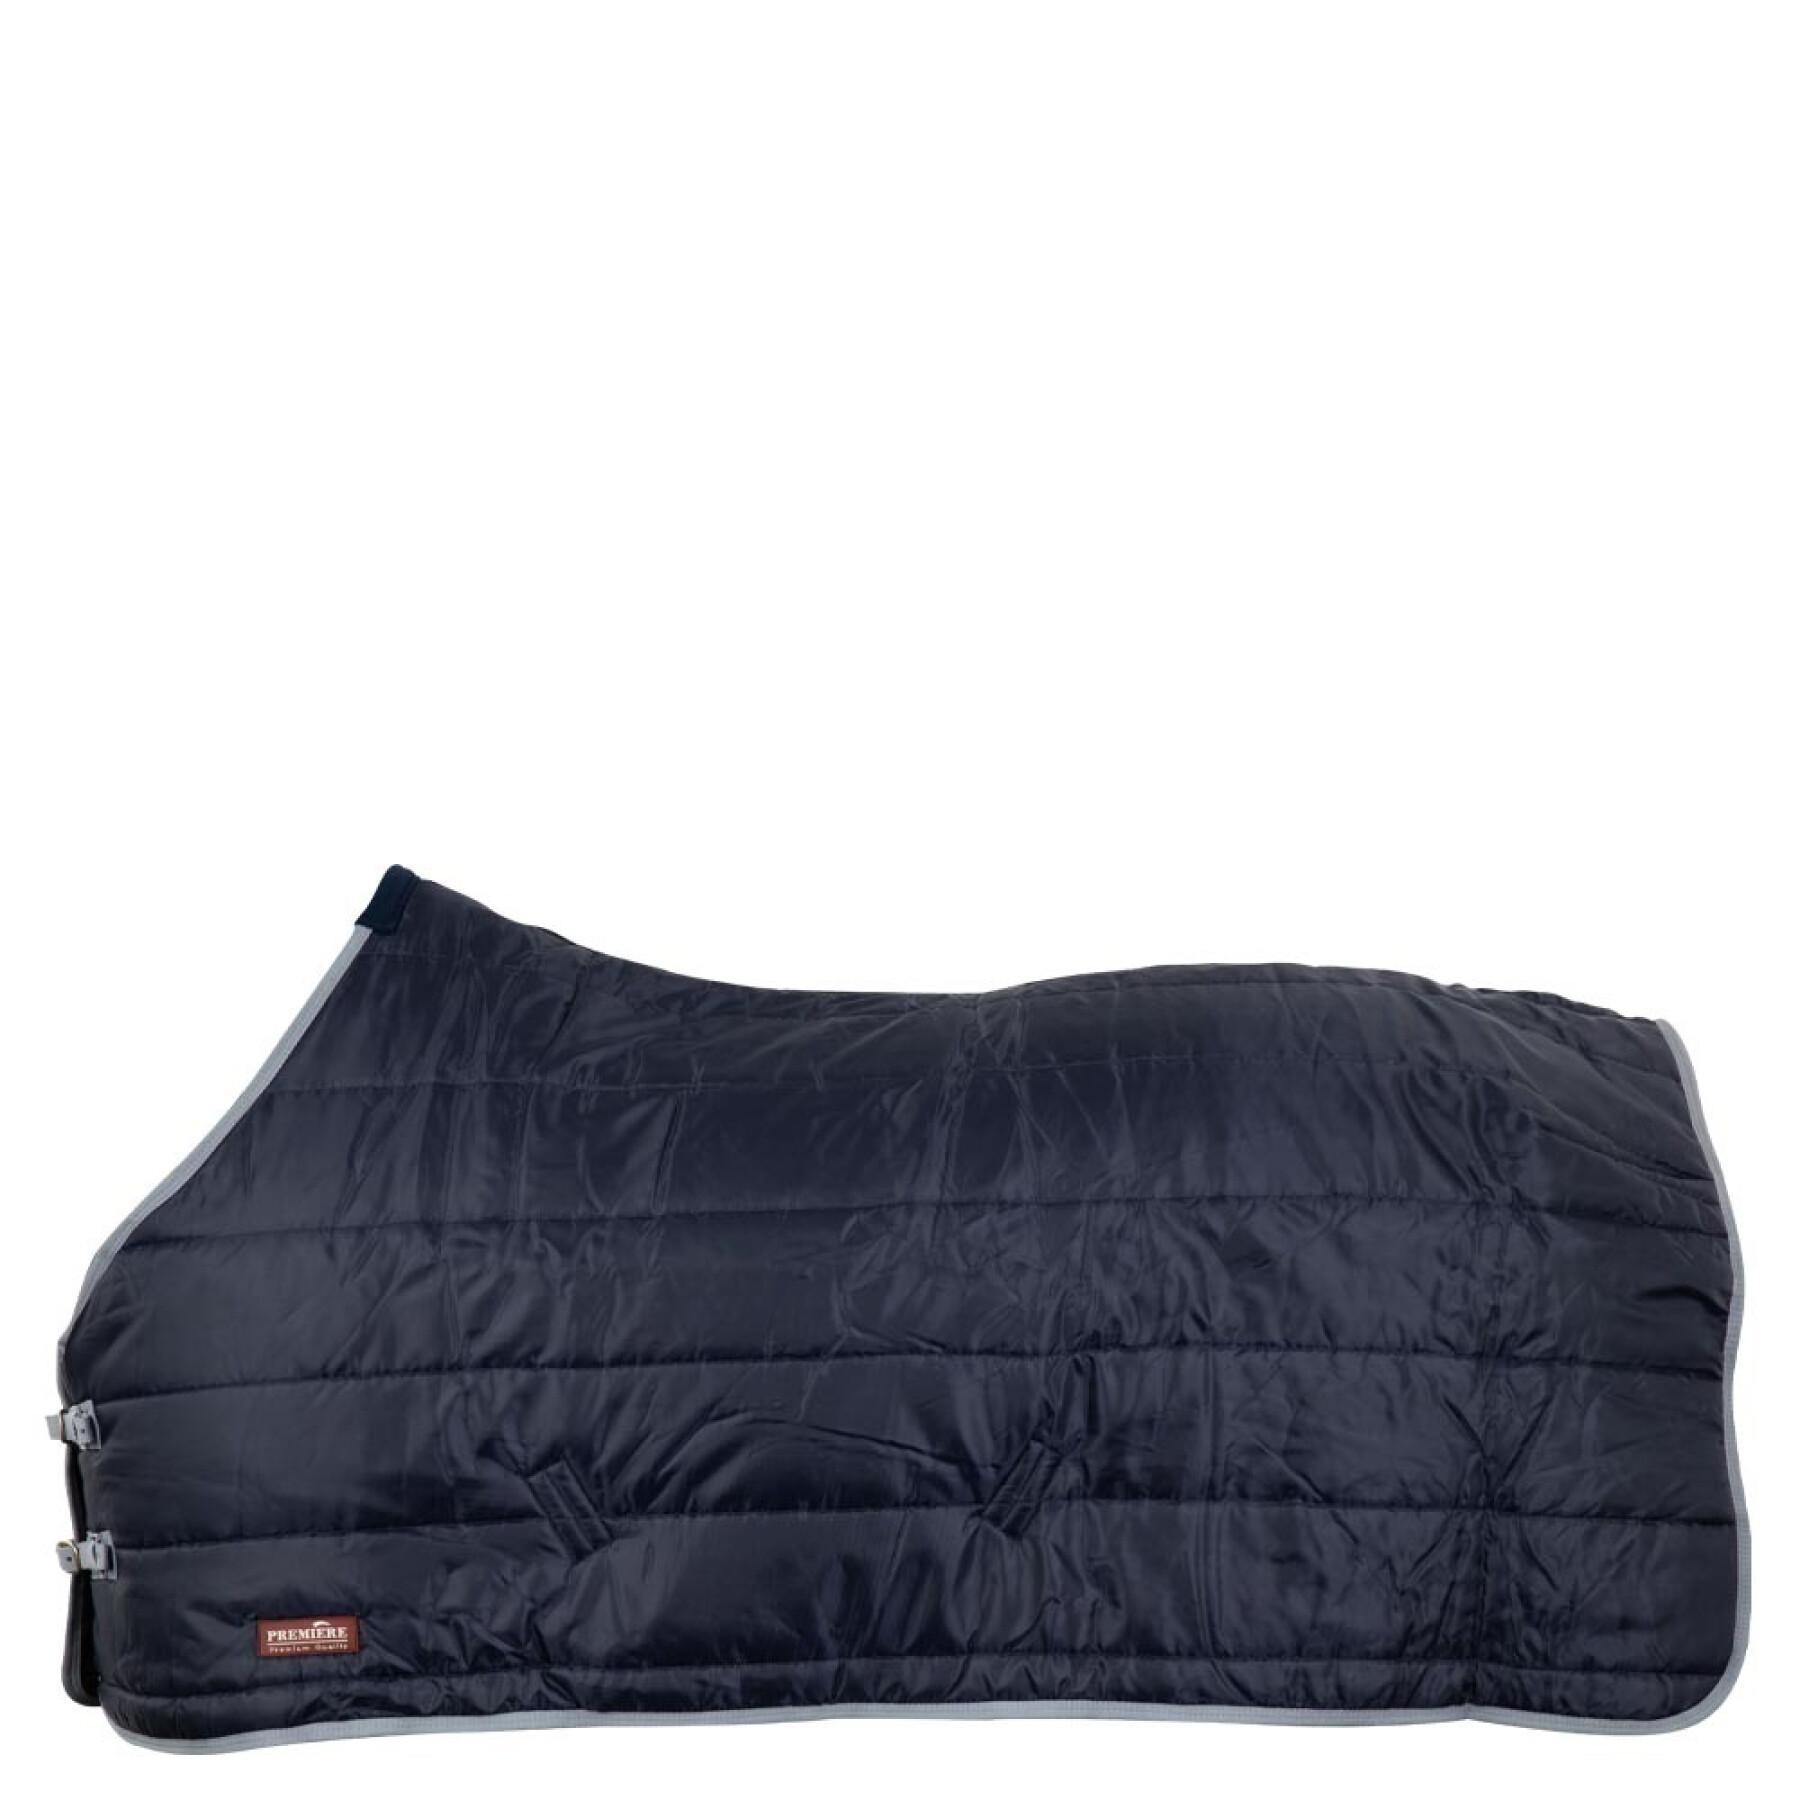 Stable Blanket  Premiere Equitation All Year 200g